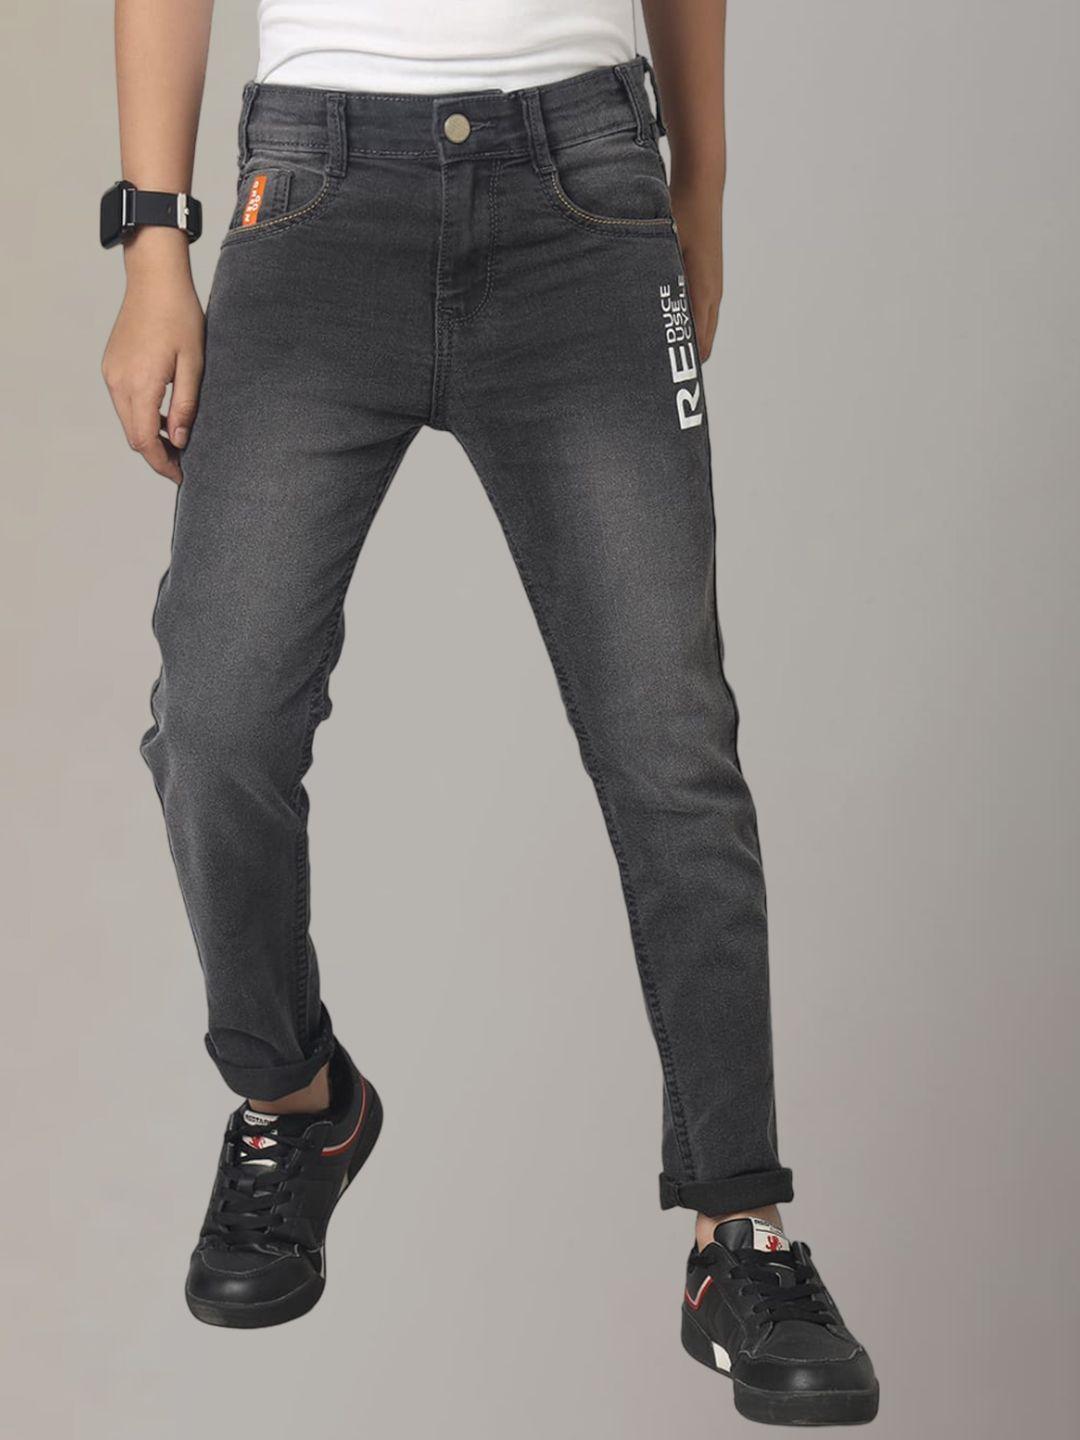 under-fourteen-only-boys-mid-rise-slim-fit-clean-look-light-fade-printed-stretchable-jeans